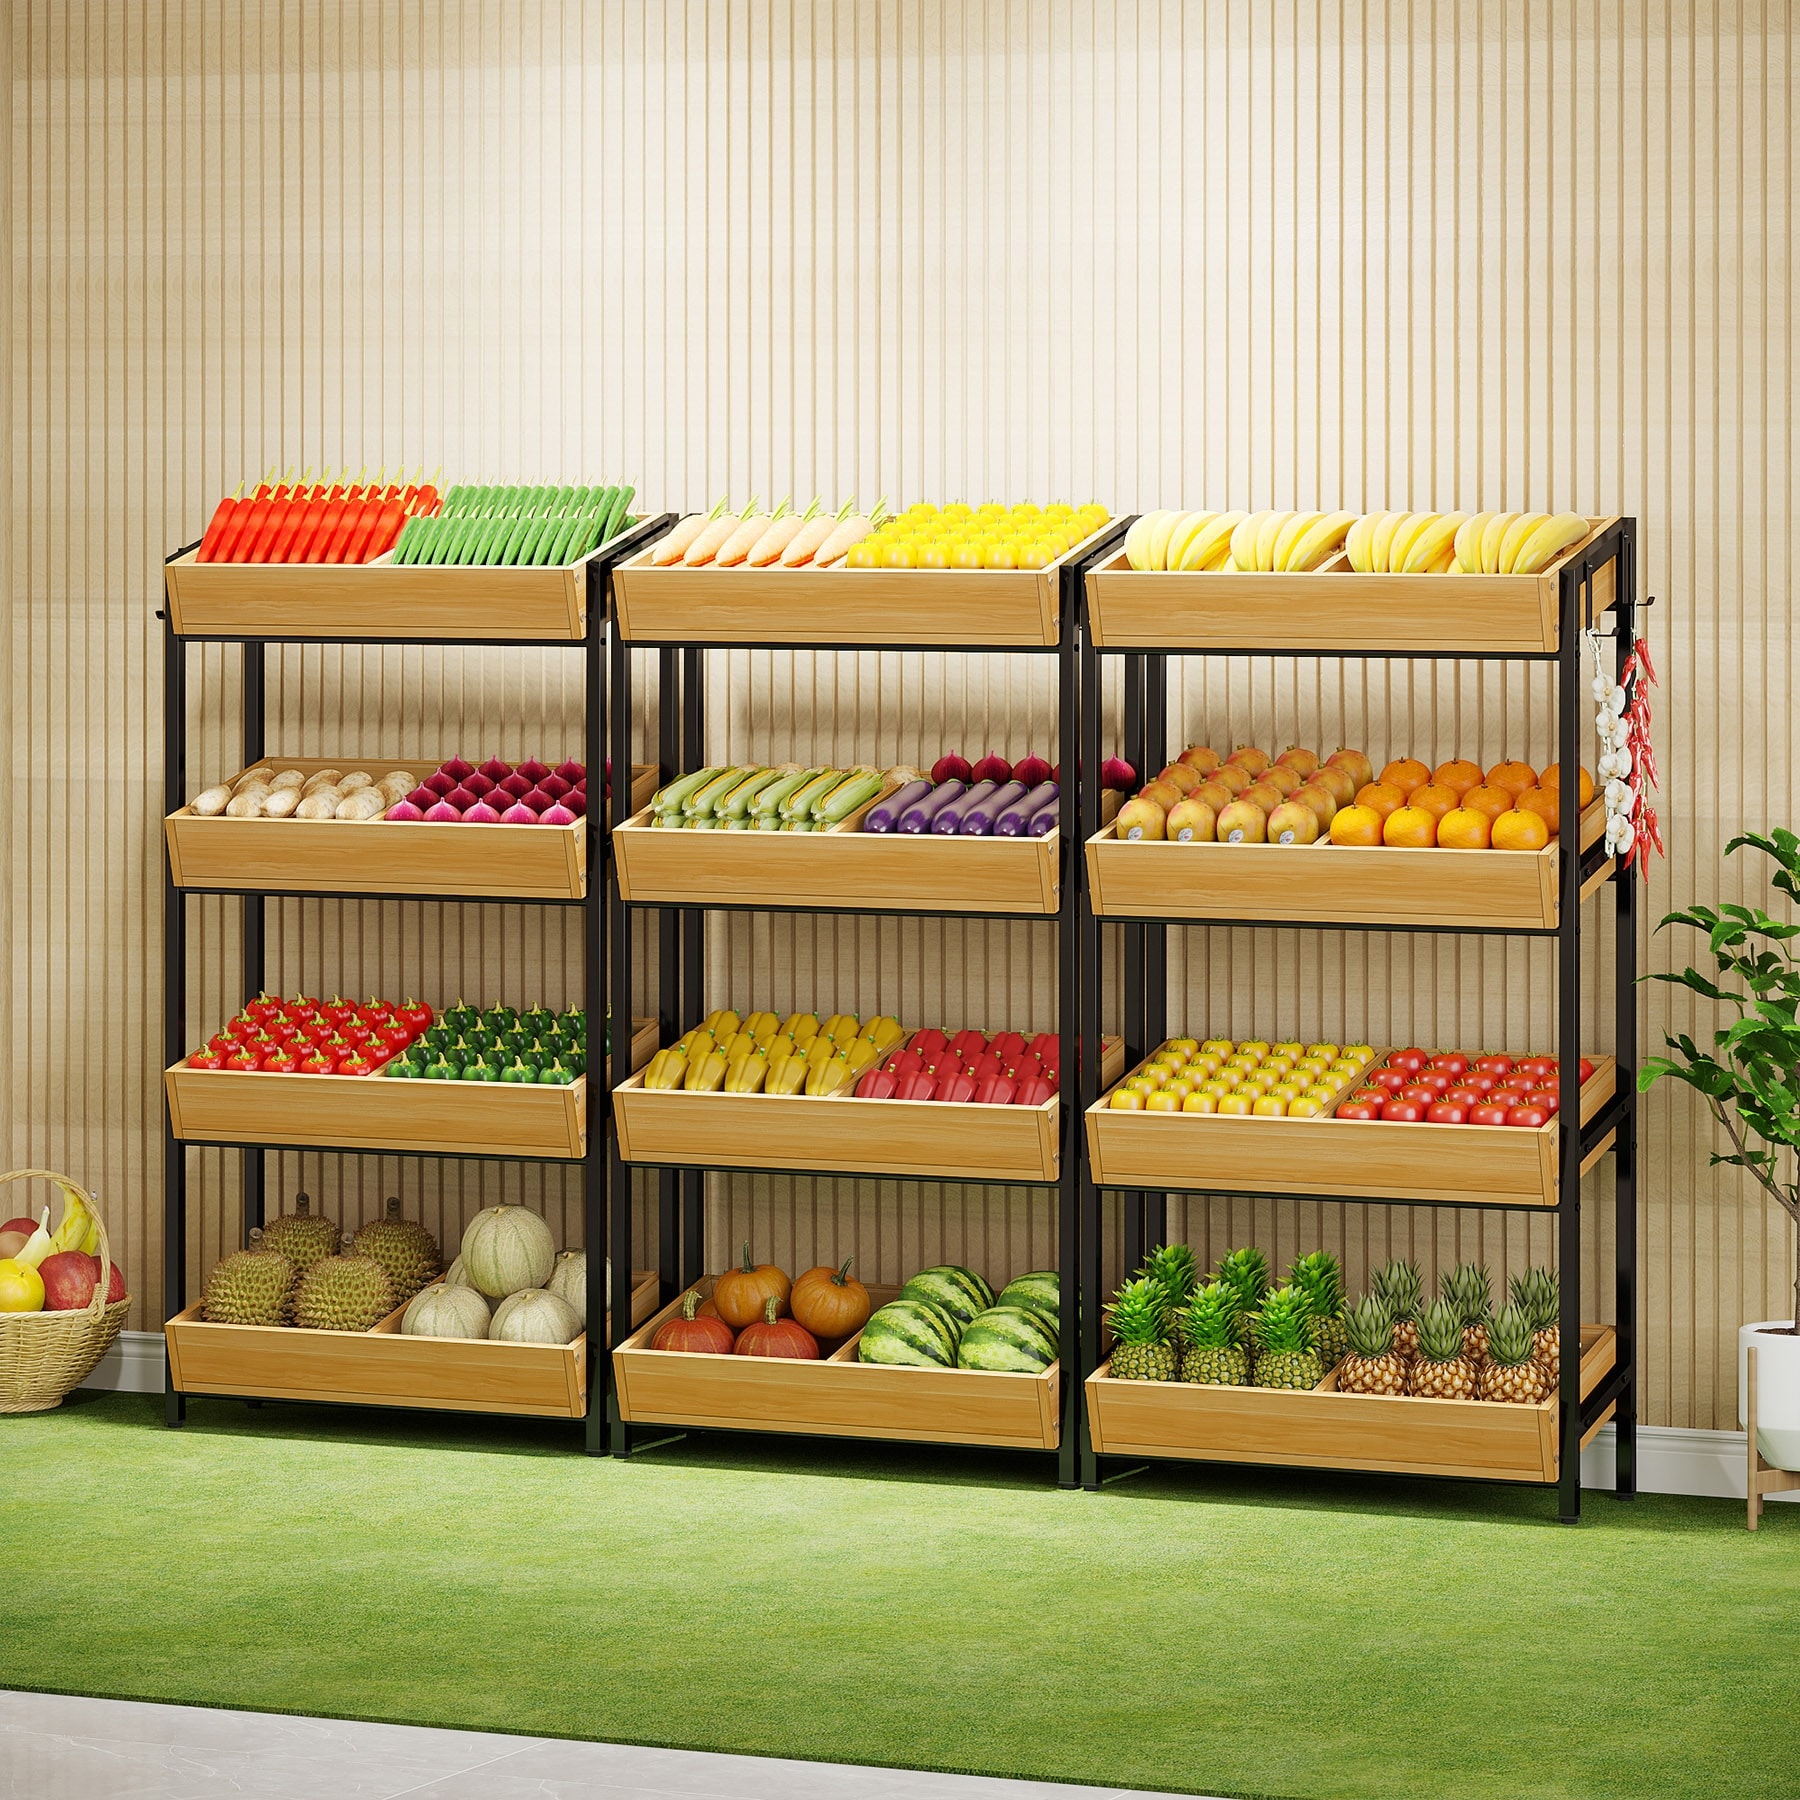 https://ak1.ostkcdn.com/images/products/is/images/direct/2d7cc4adf331ba643368084329fb7abc3e7d3c8d/Industrial-4-Tier-Vegetable-and-Fruit-Storage-Rack-Stand%2CPotato-and-Onion-Bin-with-Storage%2CWood-Shelf-Unit-Snack-Stand.jpg